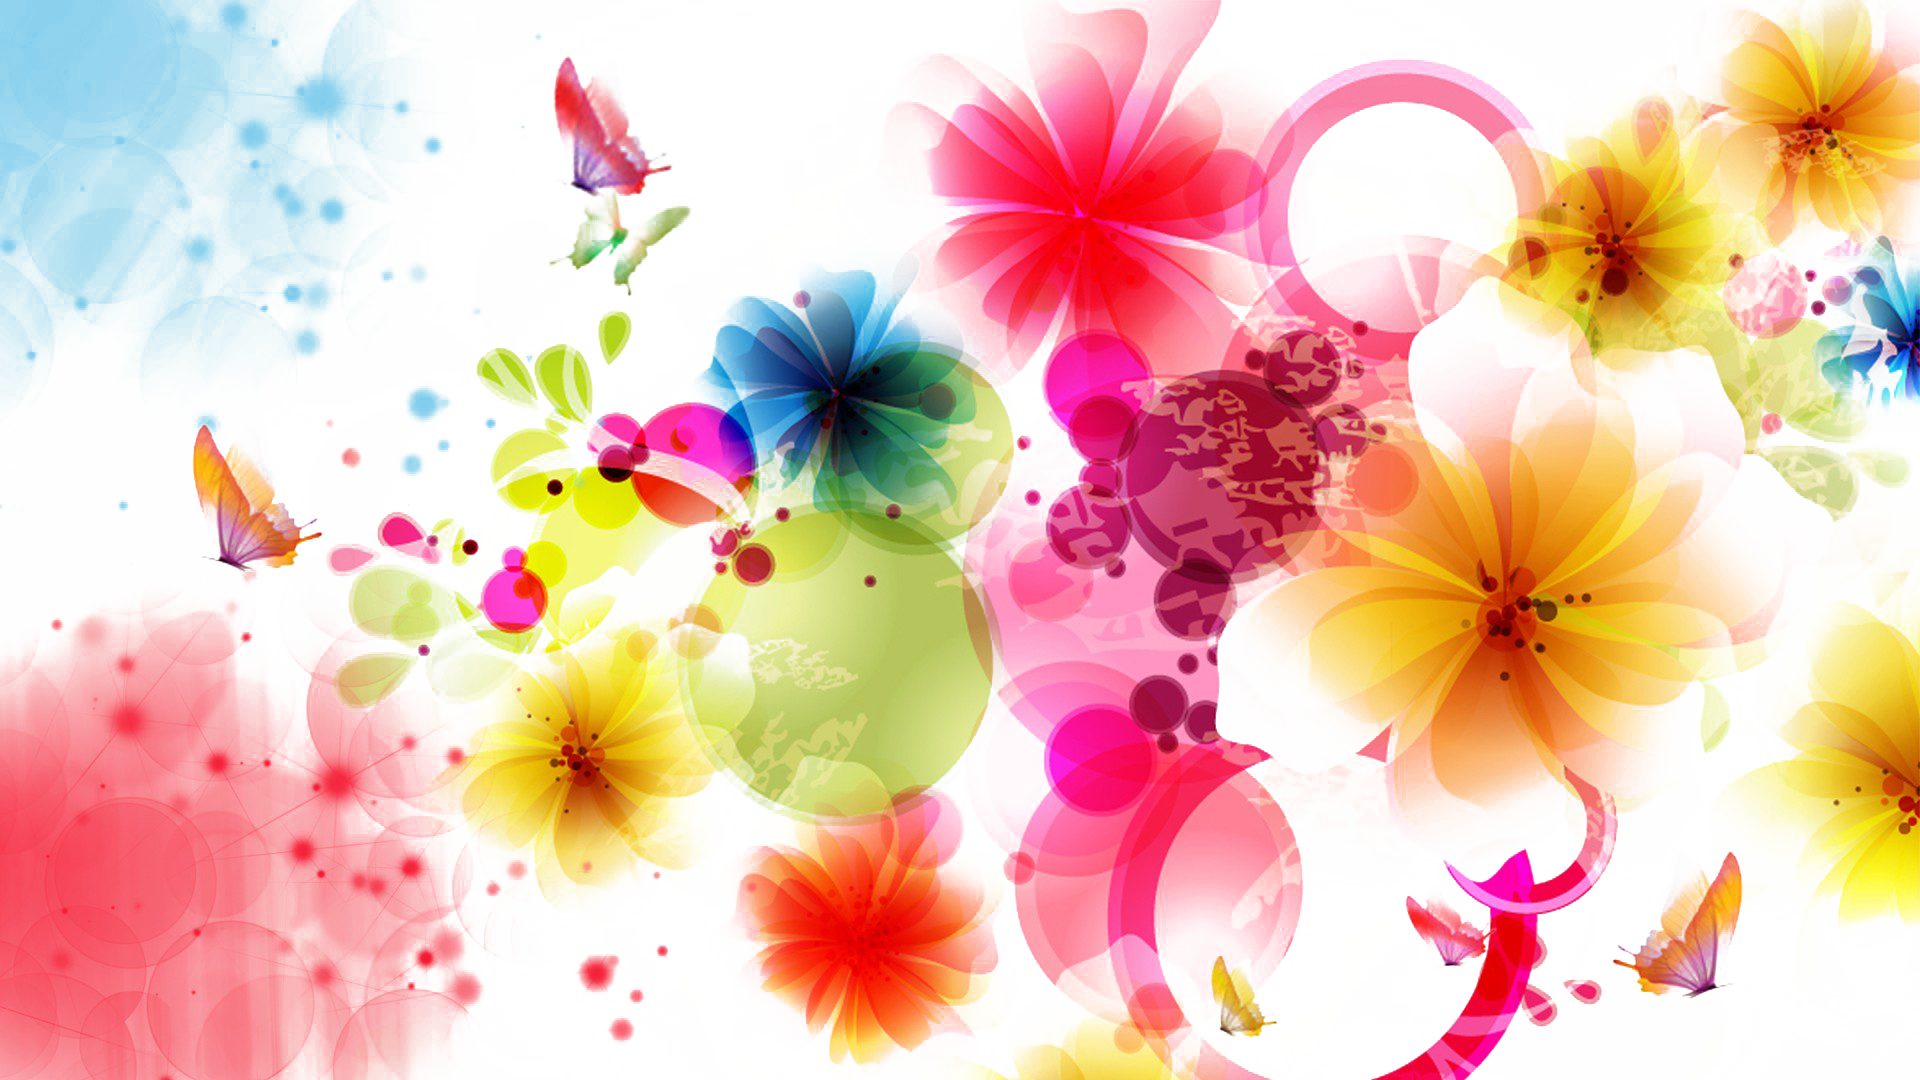 Abstract Flower Free HQ Image PNG Image